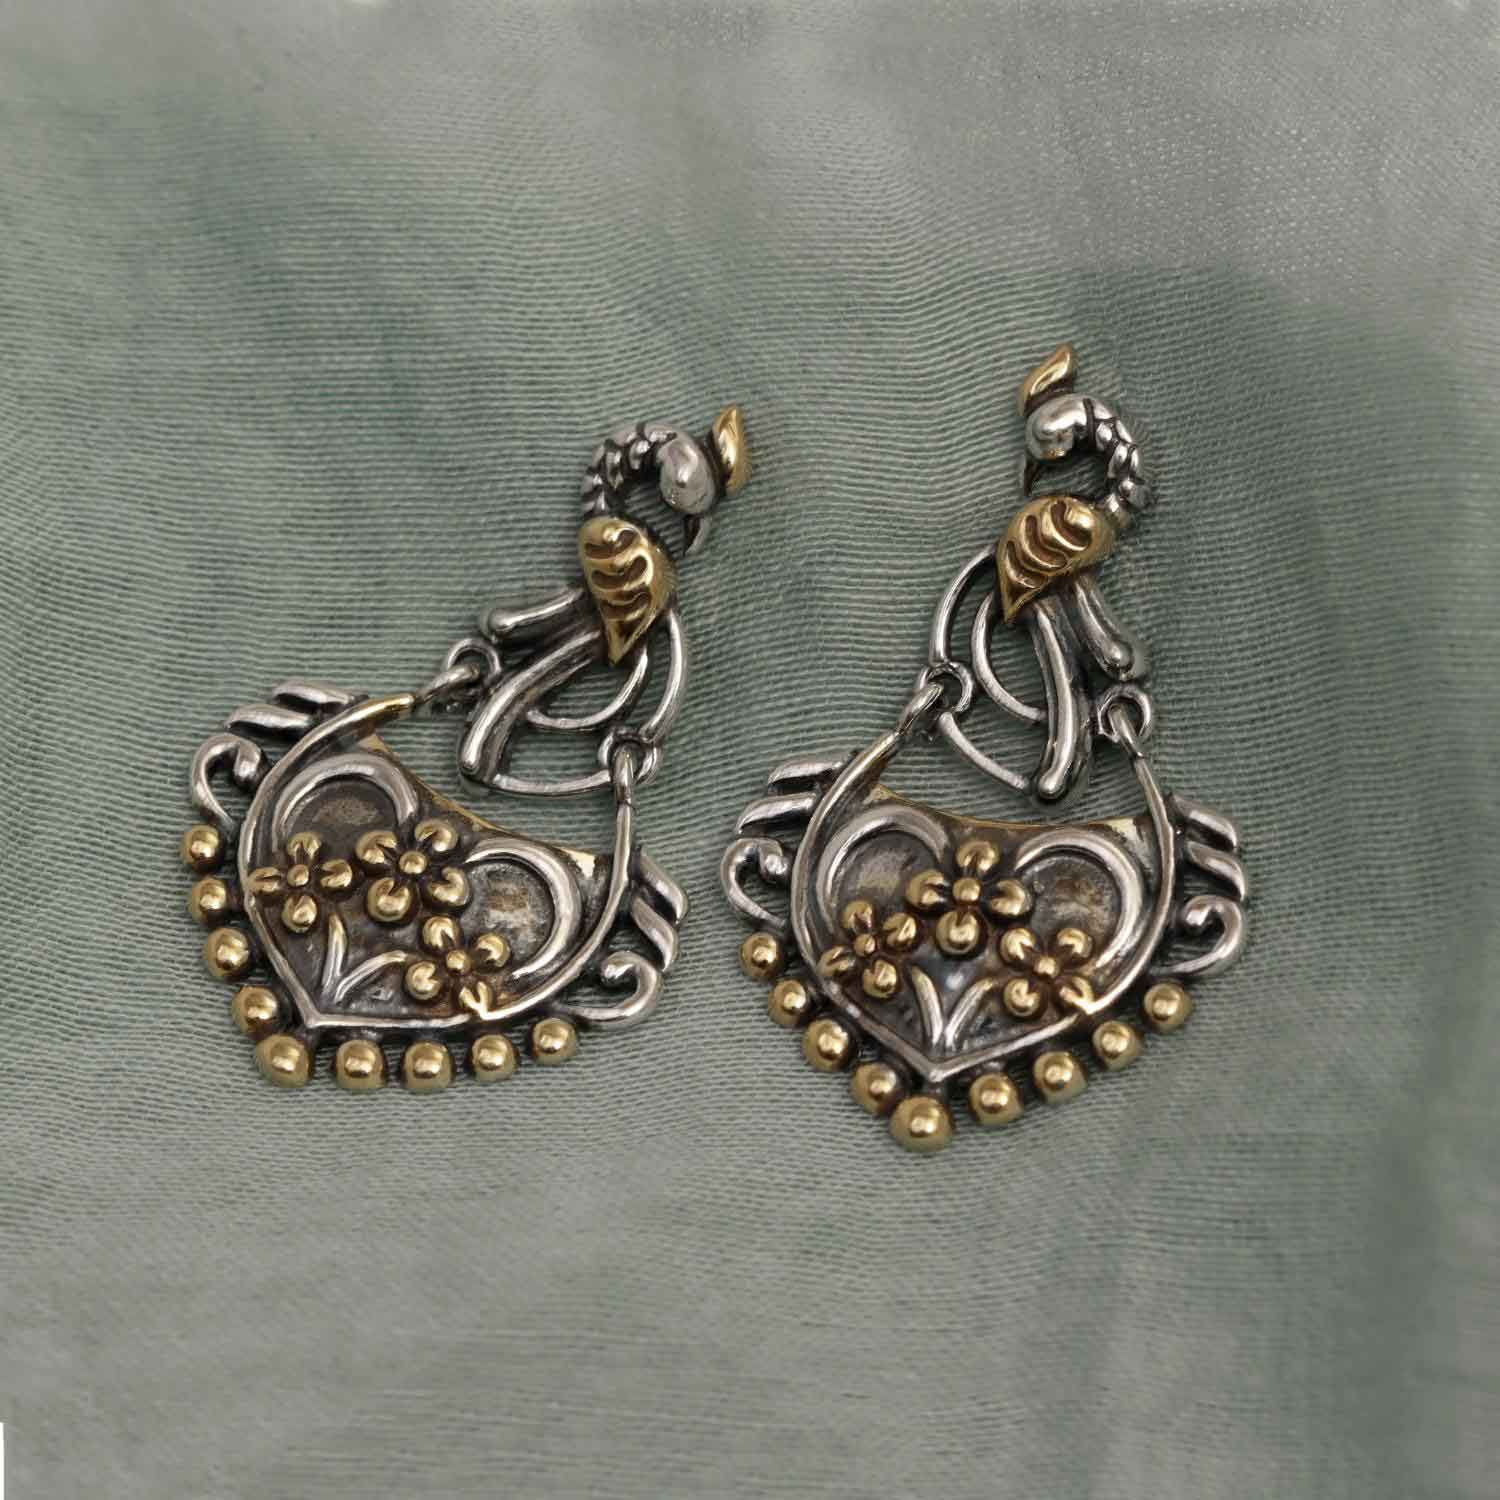 925 Sterling Silver Oxidized Gold Plated Peacock Chandbali Jaipur Style Dangler Earrings for Women and Girls